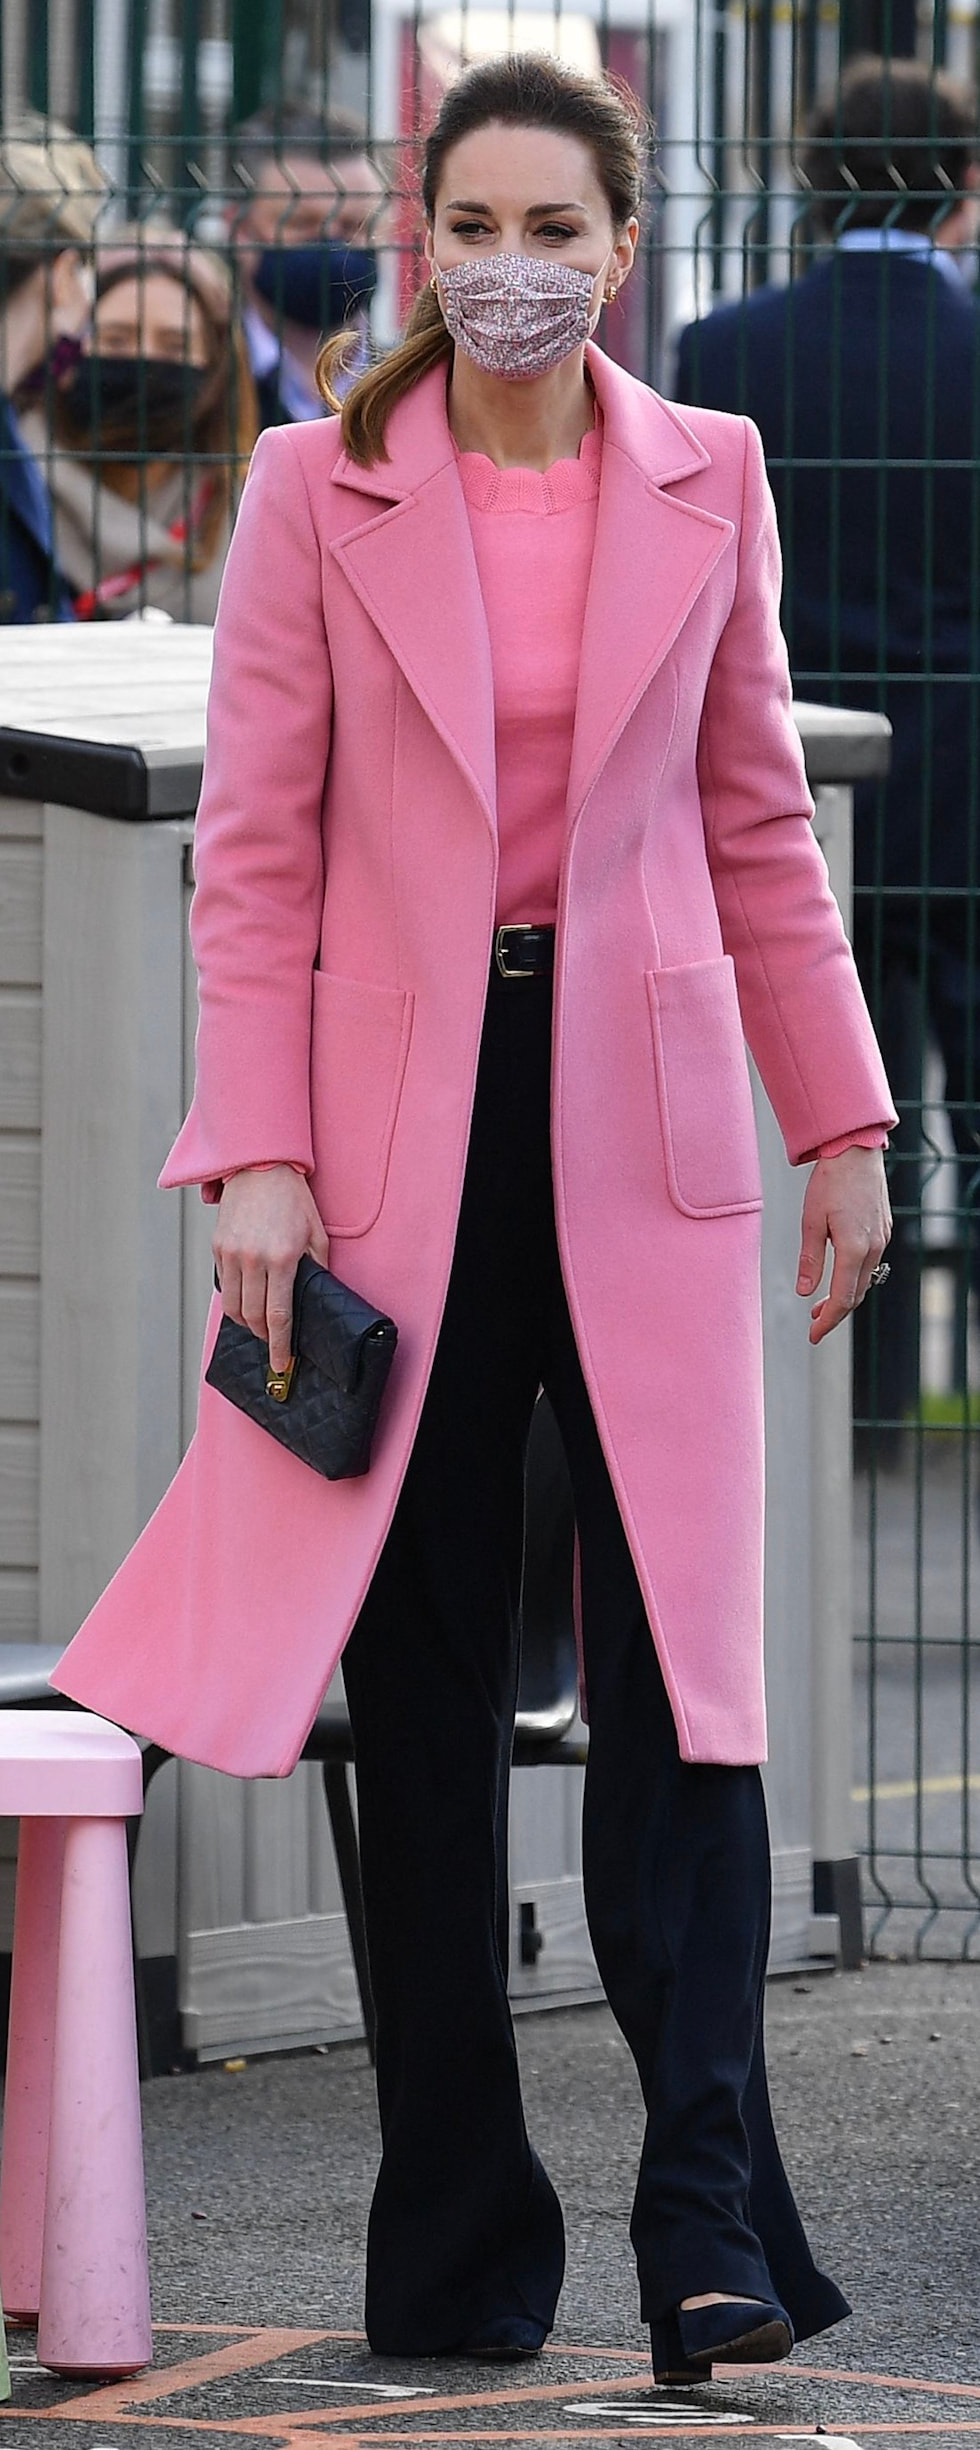 MAX & Co Pink Wool Runway Coat as seen on Kate Middleton, The Duchess of Cambridge